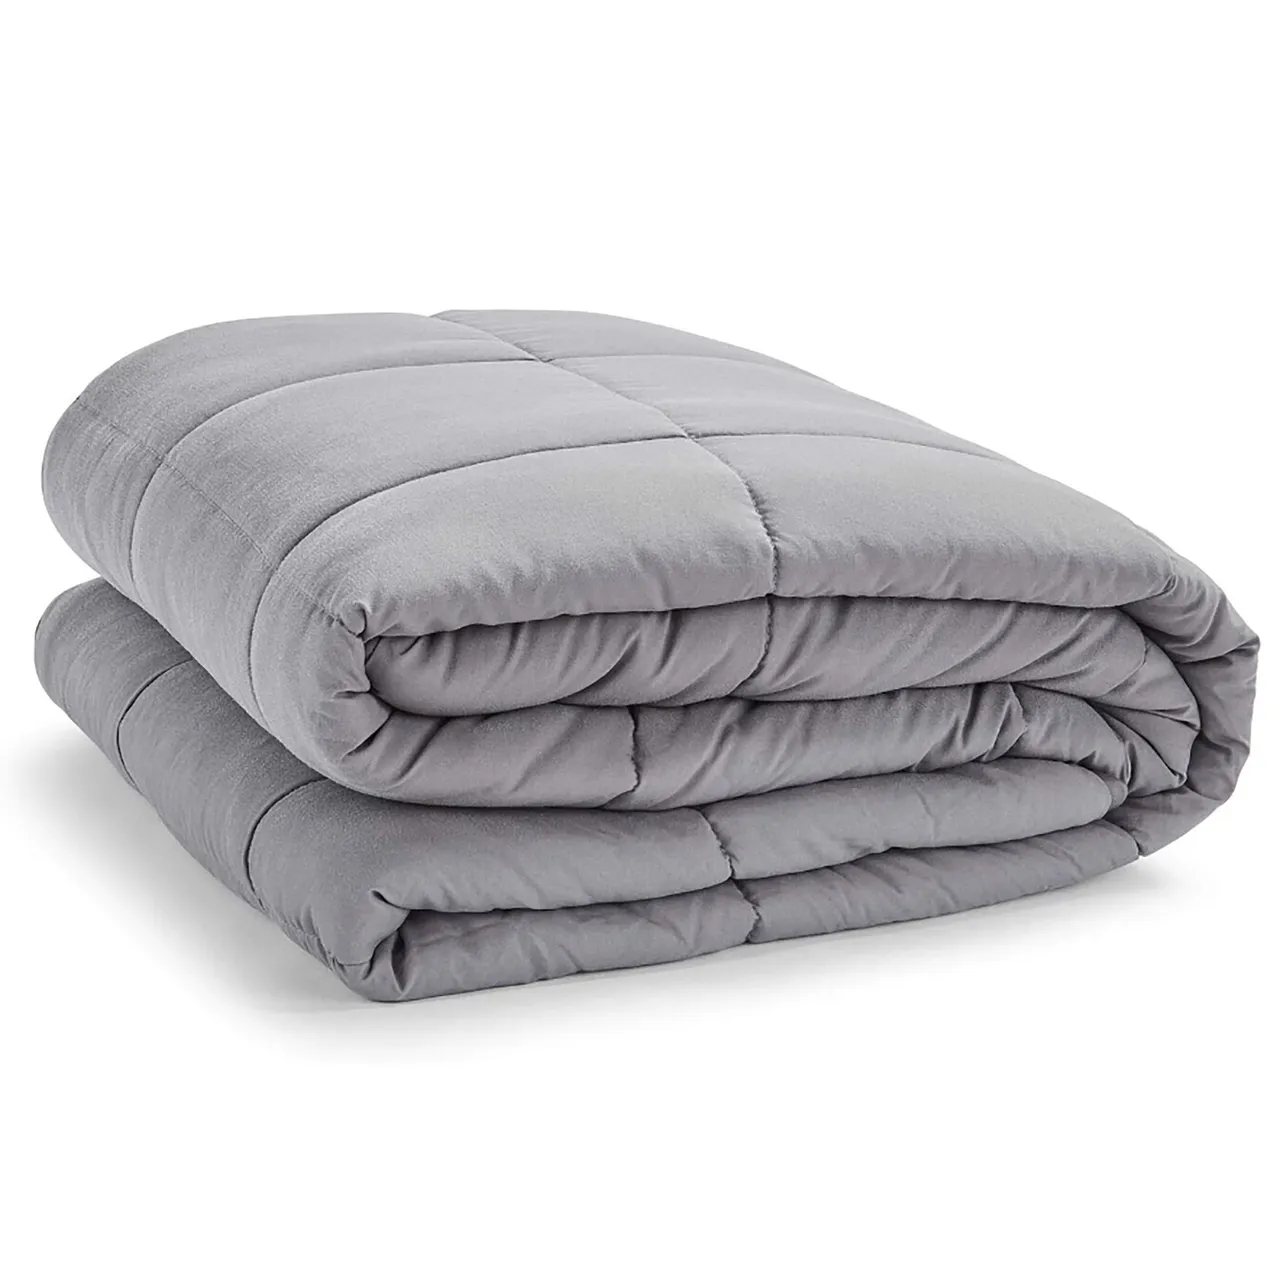 WEIGHTED BLANKETS 080922 13